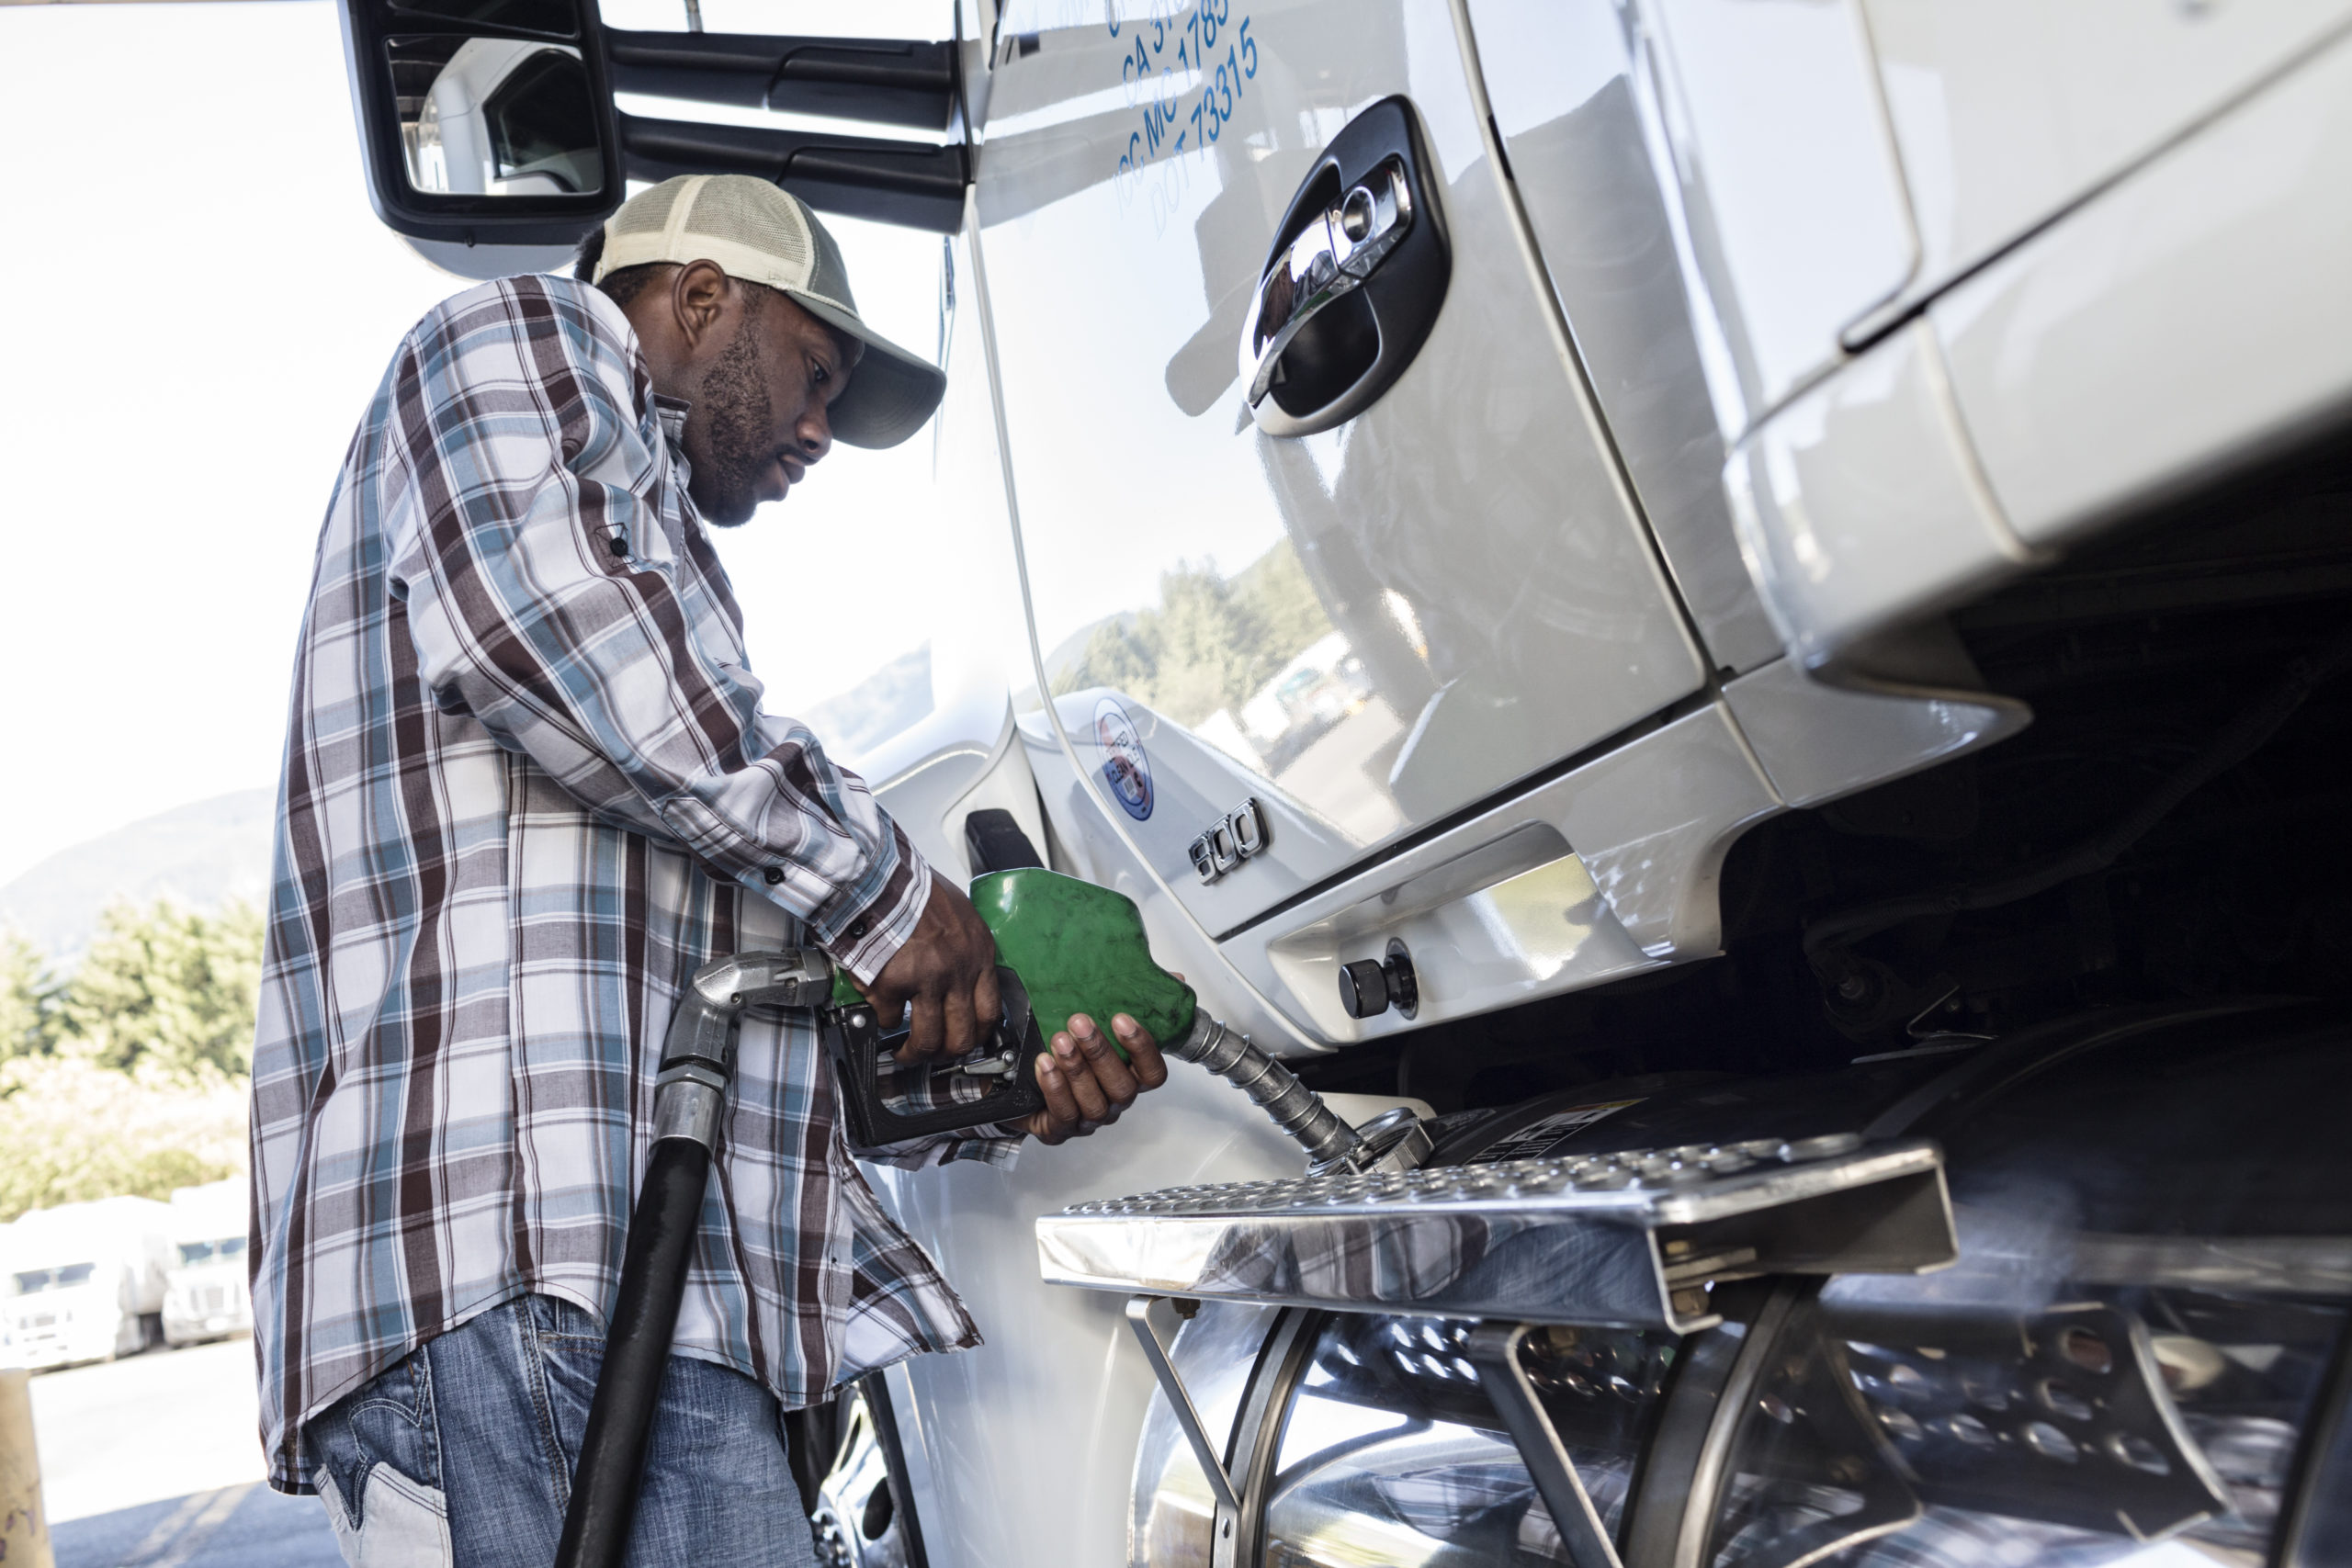 https://autolab.com.co/wp-content/uploads/black-man-truck-driver-putting-diesel-fuel-in-his-2023-11-27-05-34-30-utc-scaled.jpg